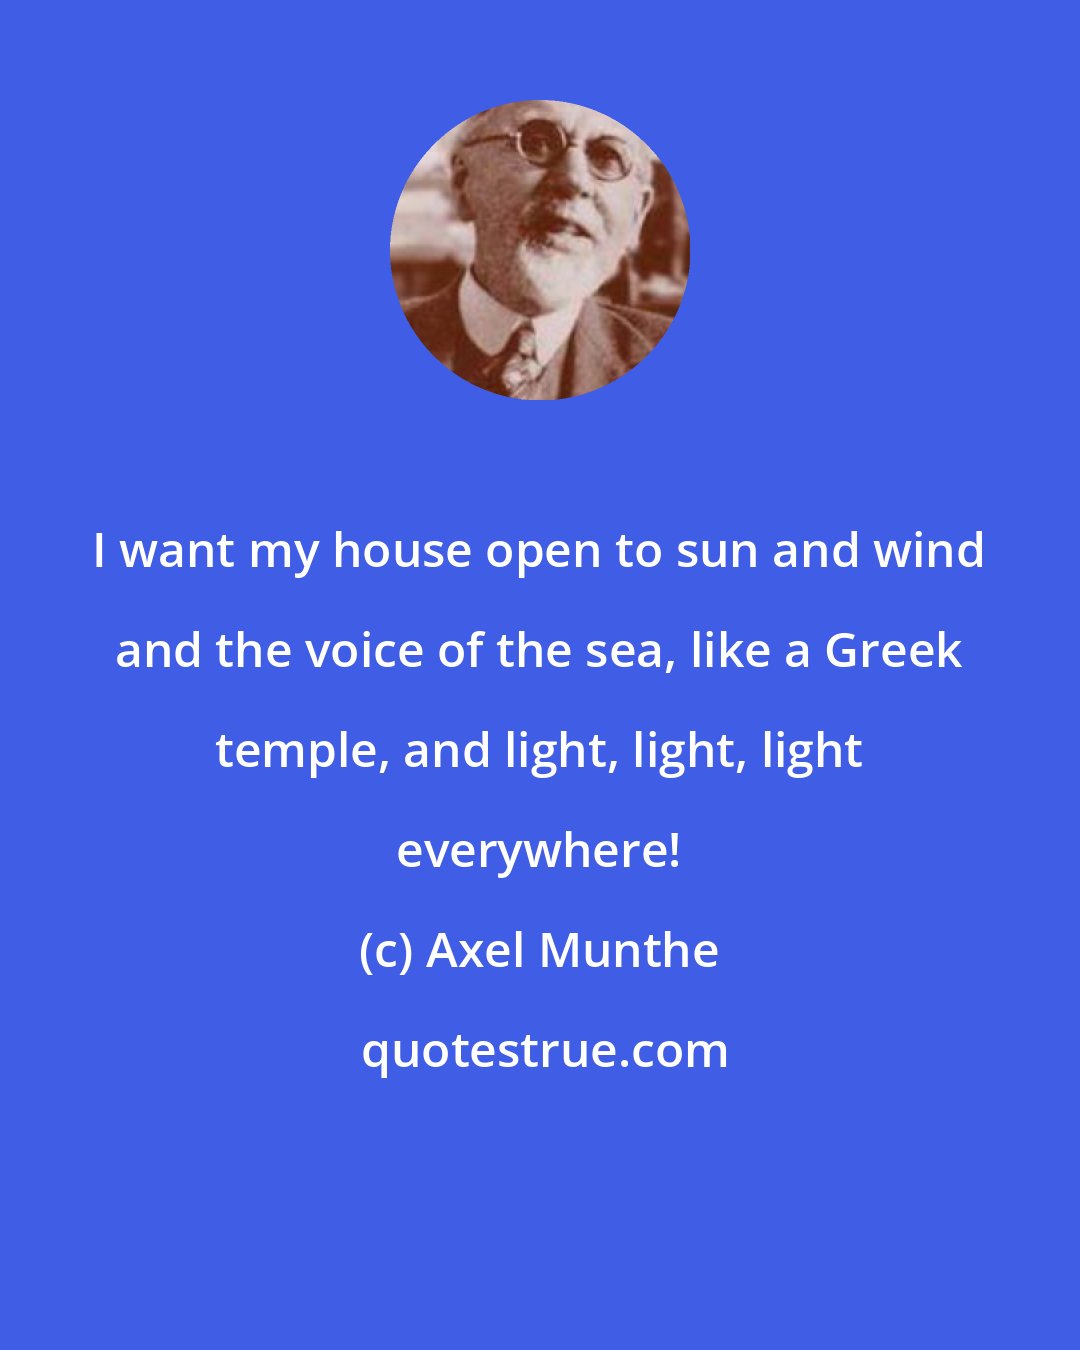 Axel Munthe: I want my house open to sun and wind and the voice of the sea, like a Greek temple, and light, light, light everywhere!